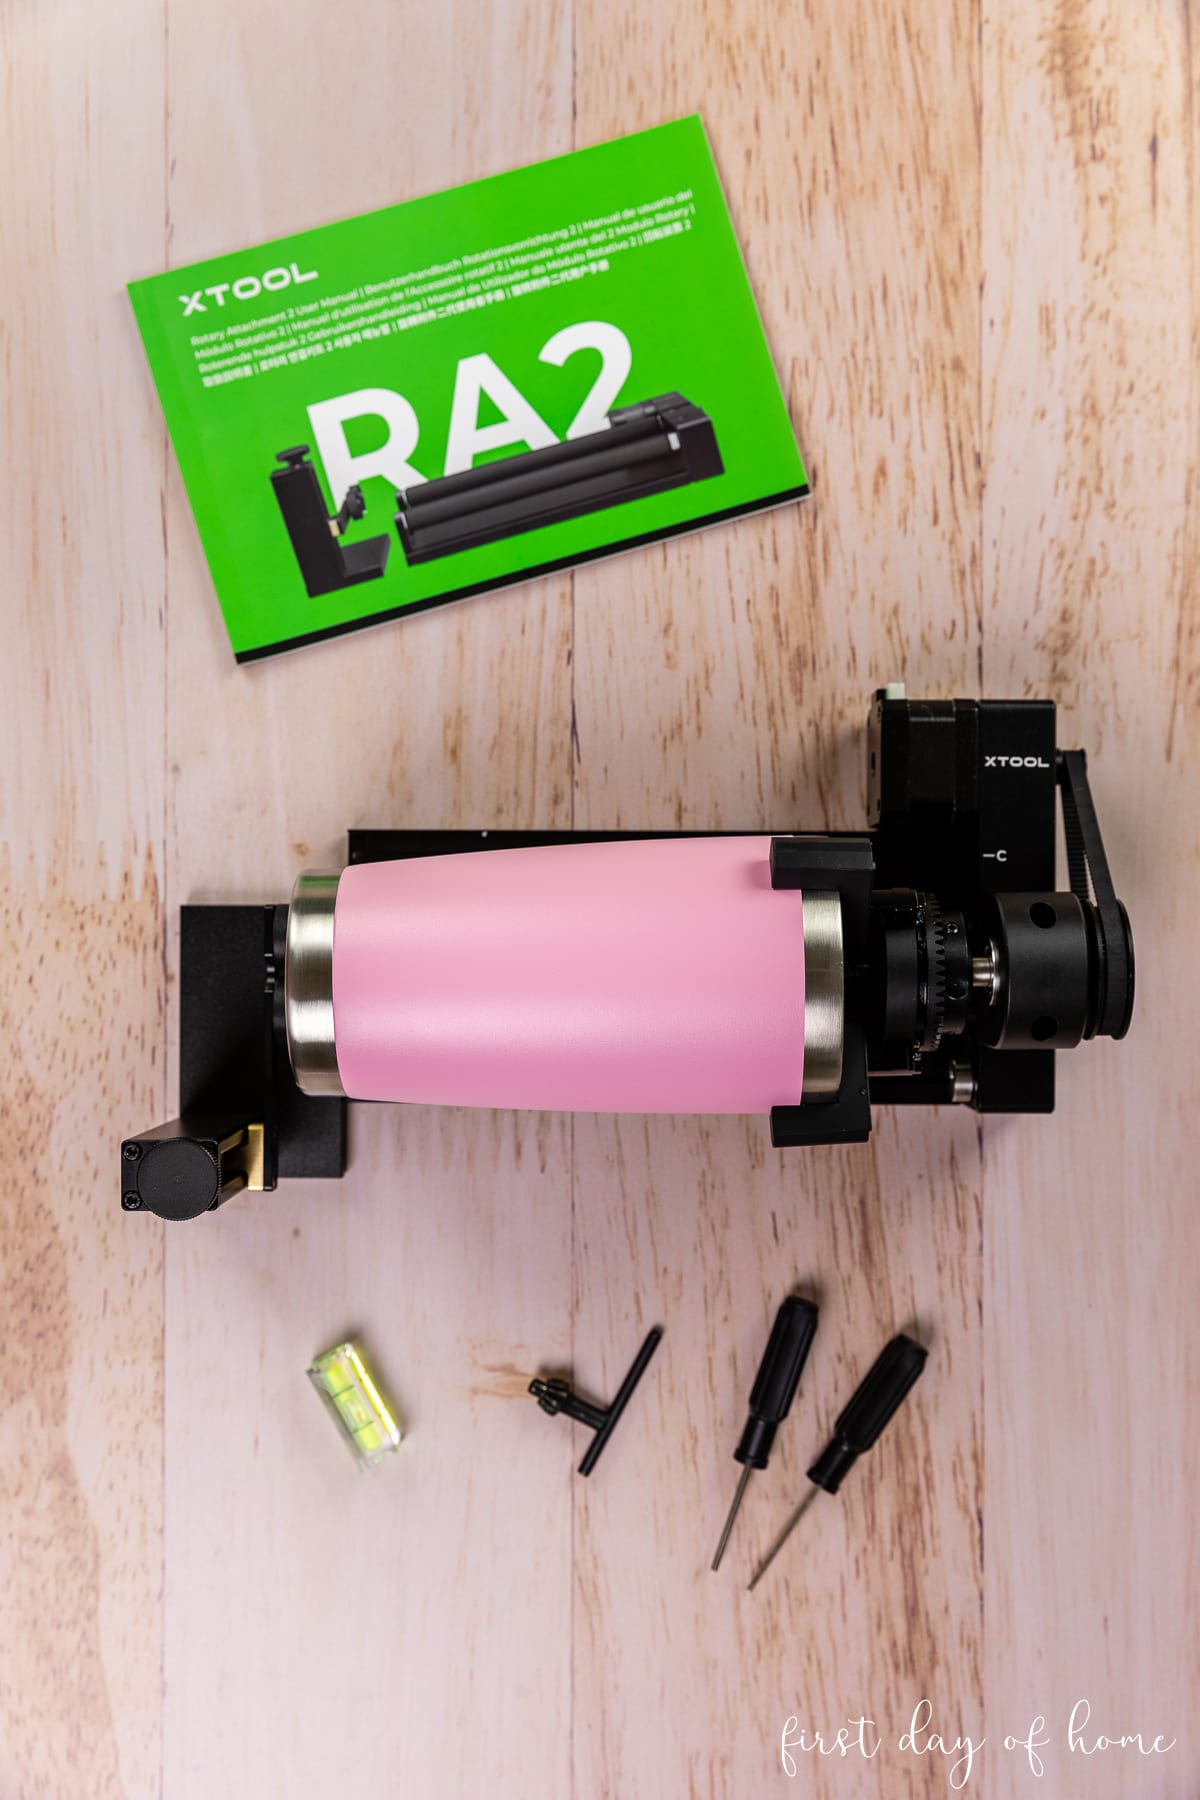 Supplies for laser engraving tumblers, including the RA2 Pro Rotary Attachment and a powder-coated tumbler.